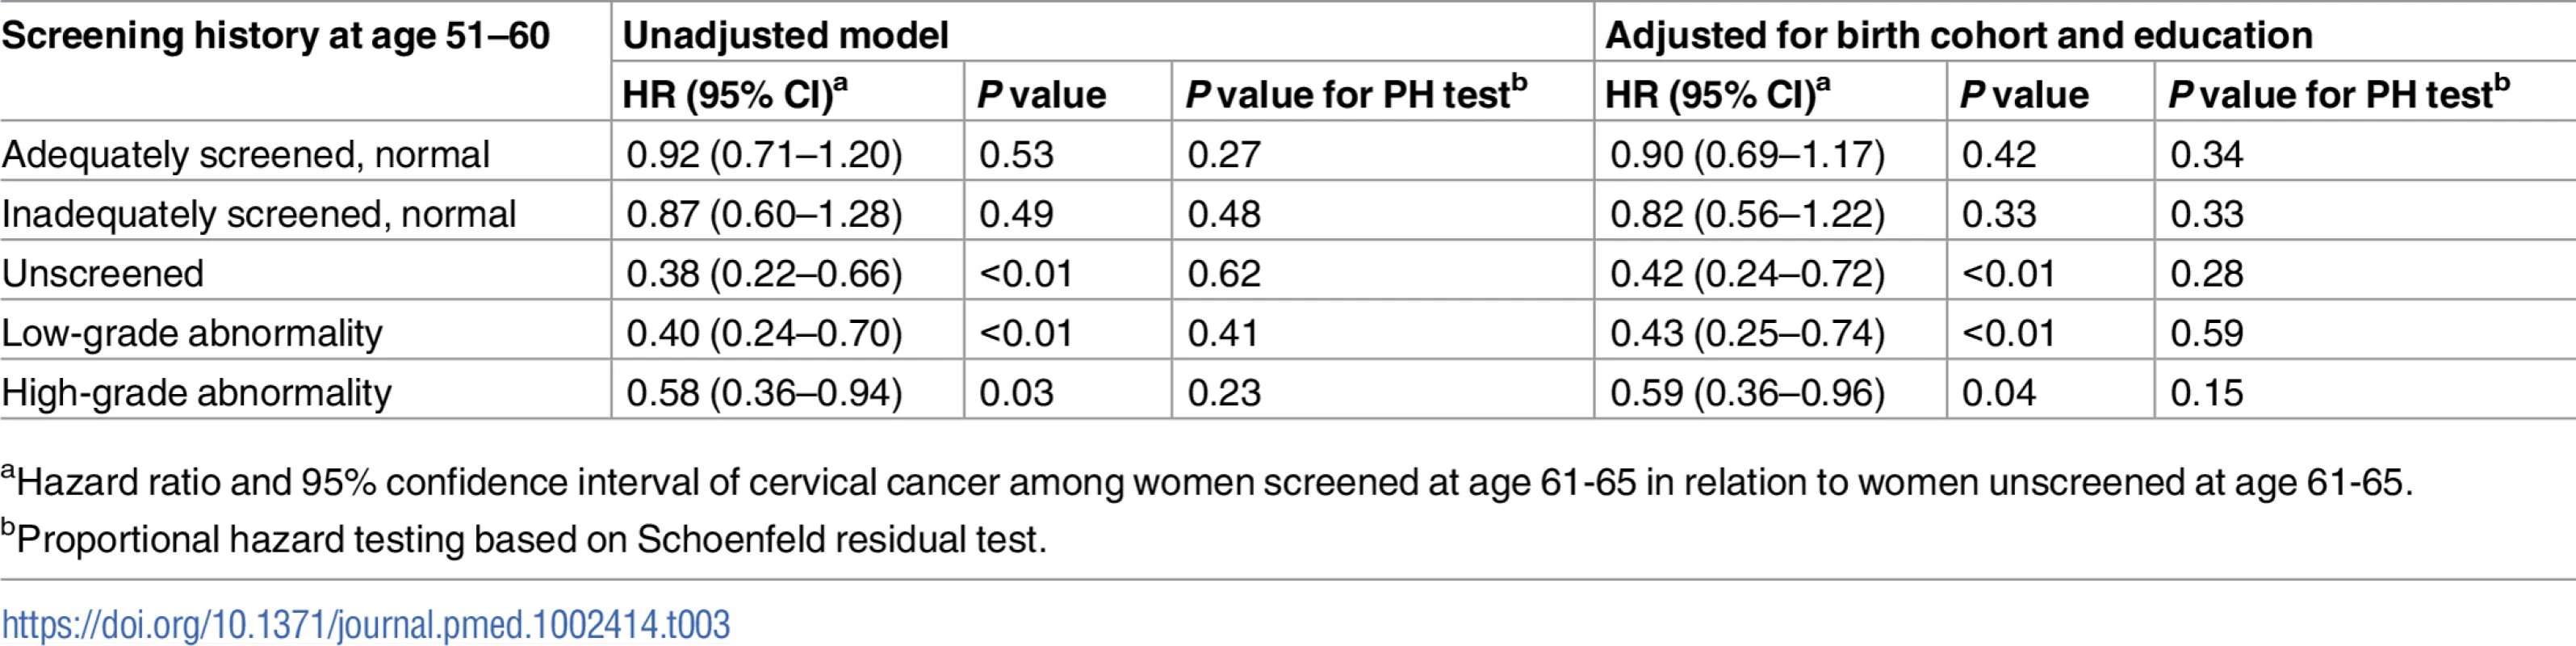 Cause-specific hazard ratio of cervical cancer from age 61 to age 80 comparing women screened and unscreened at age 61–65, by screening history at age 51–60, based on Cox regression model.